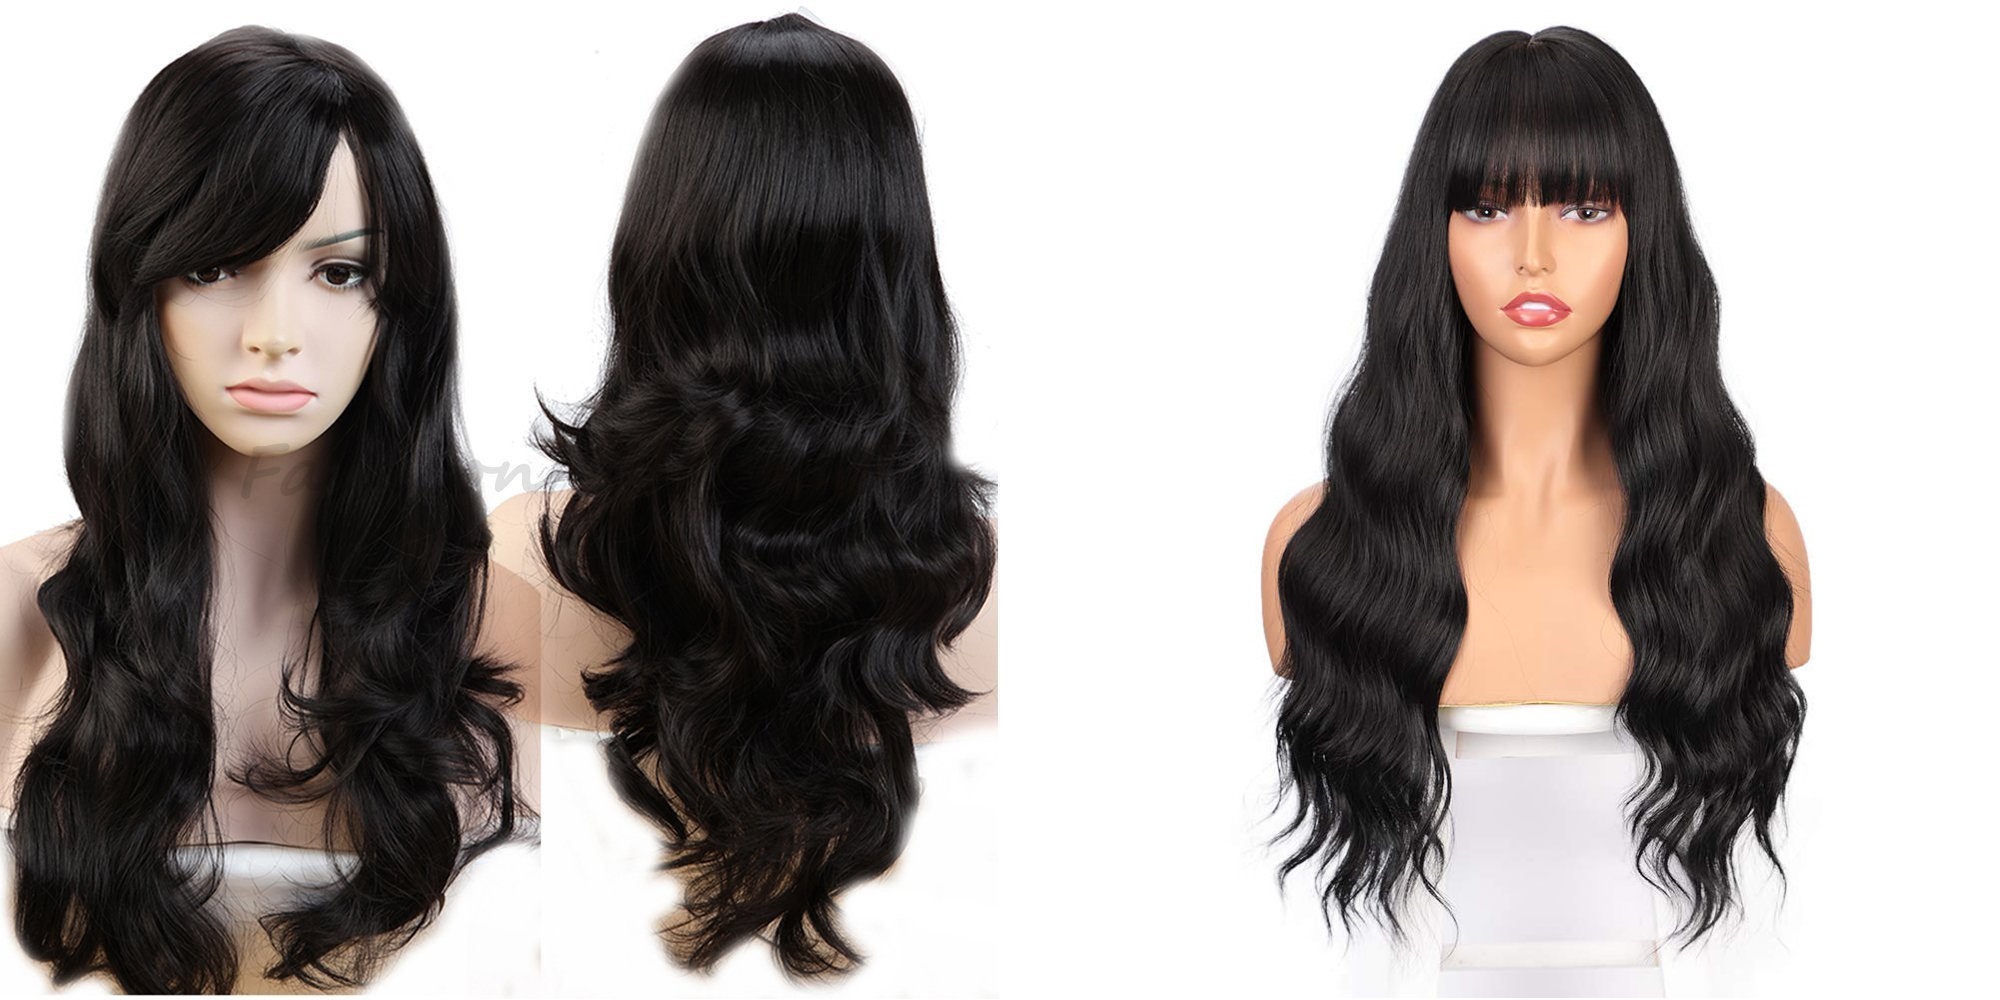 Buy Quality Hair Wigs From Hairsmarket